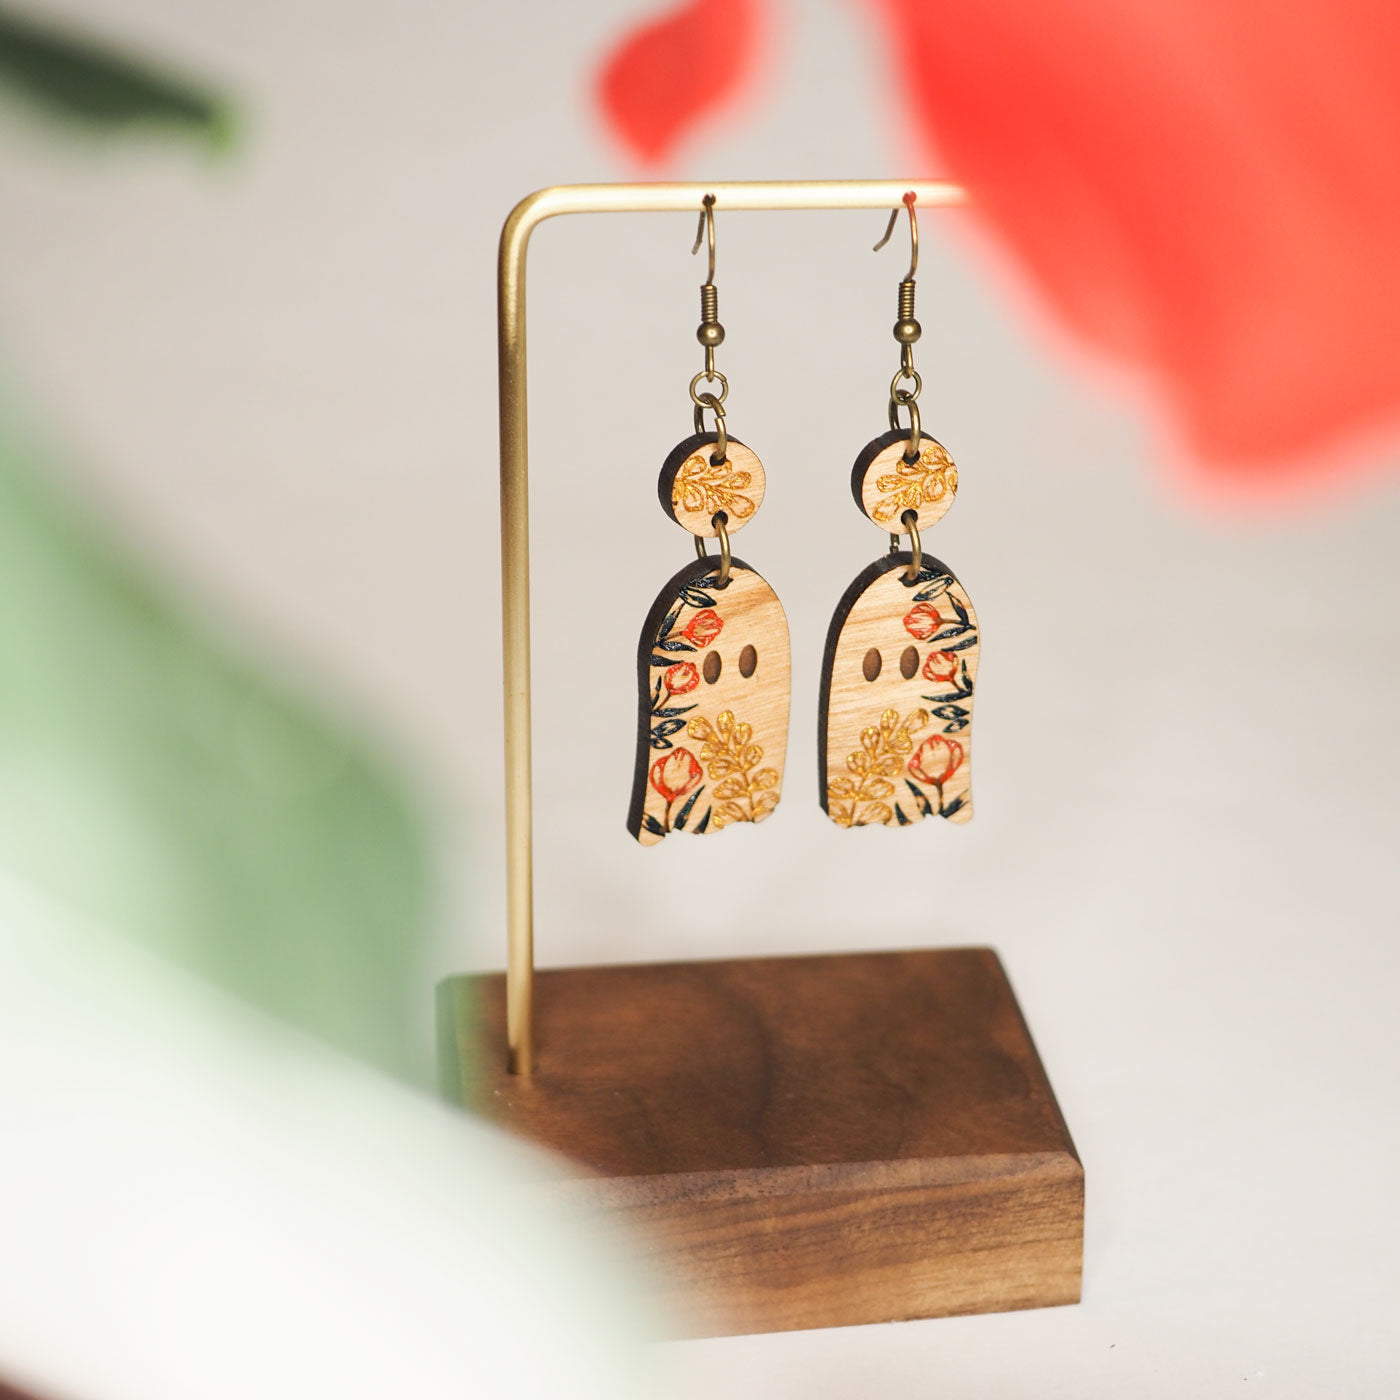 Cherry wood ghost-shaped dangle earrings with red and gold hand-painted flowers